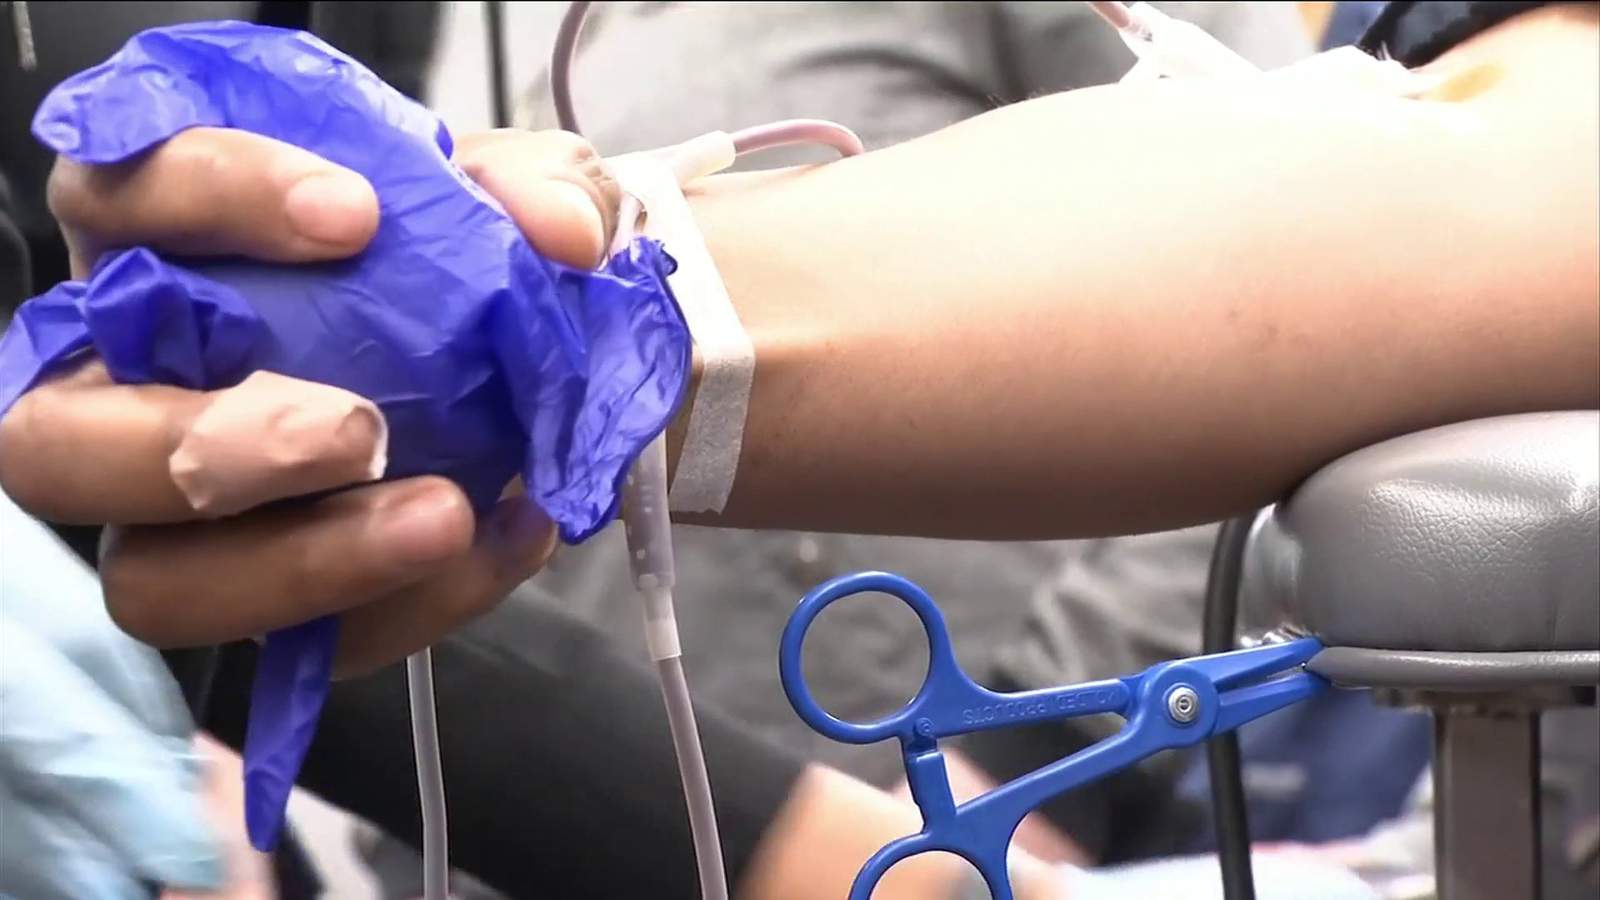 Nationwide blood shortage prompts call for donations in Northeast Florida